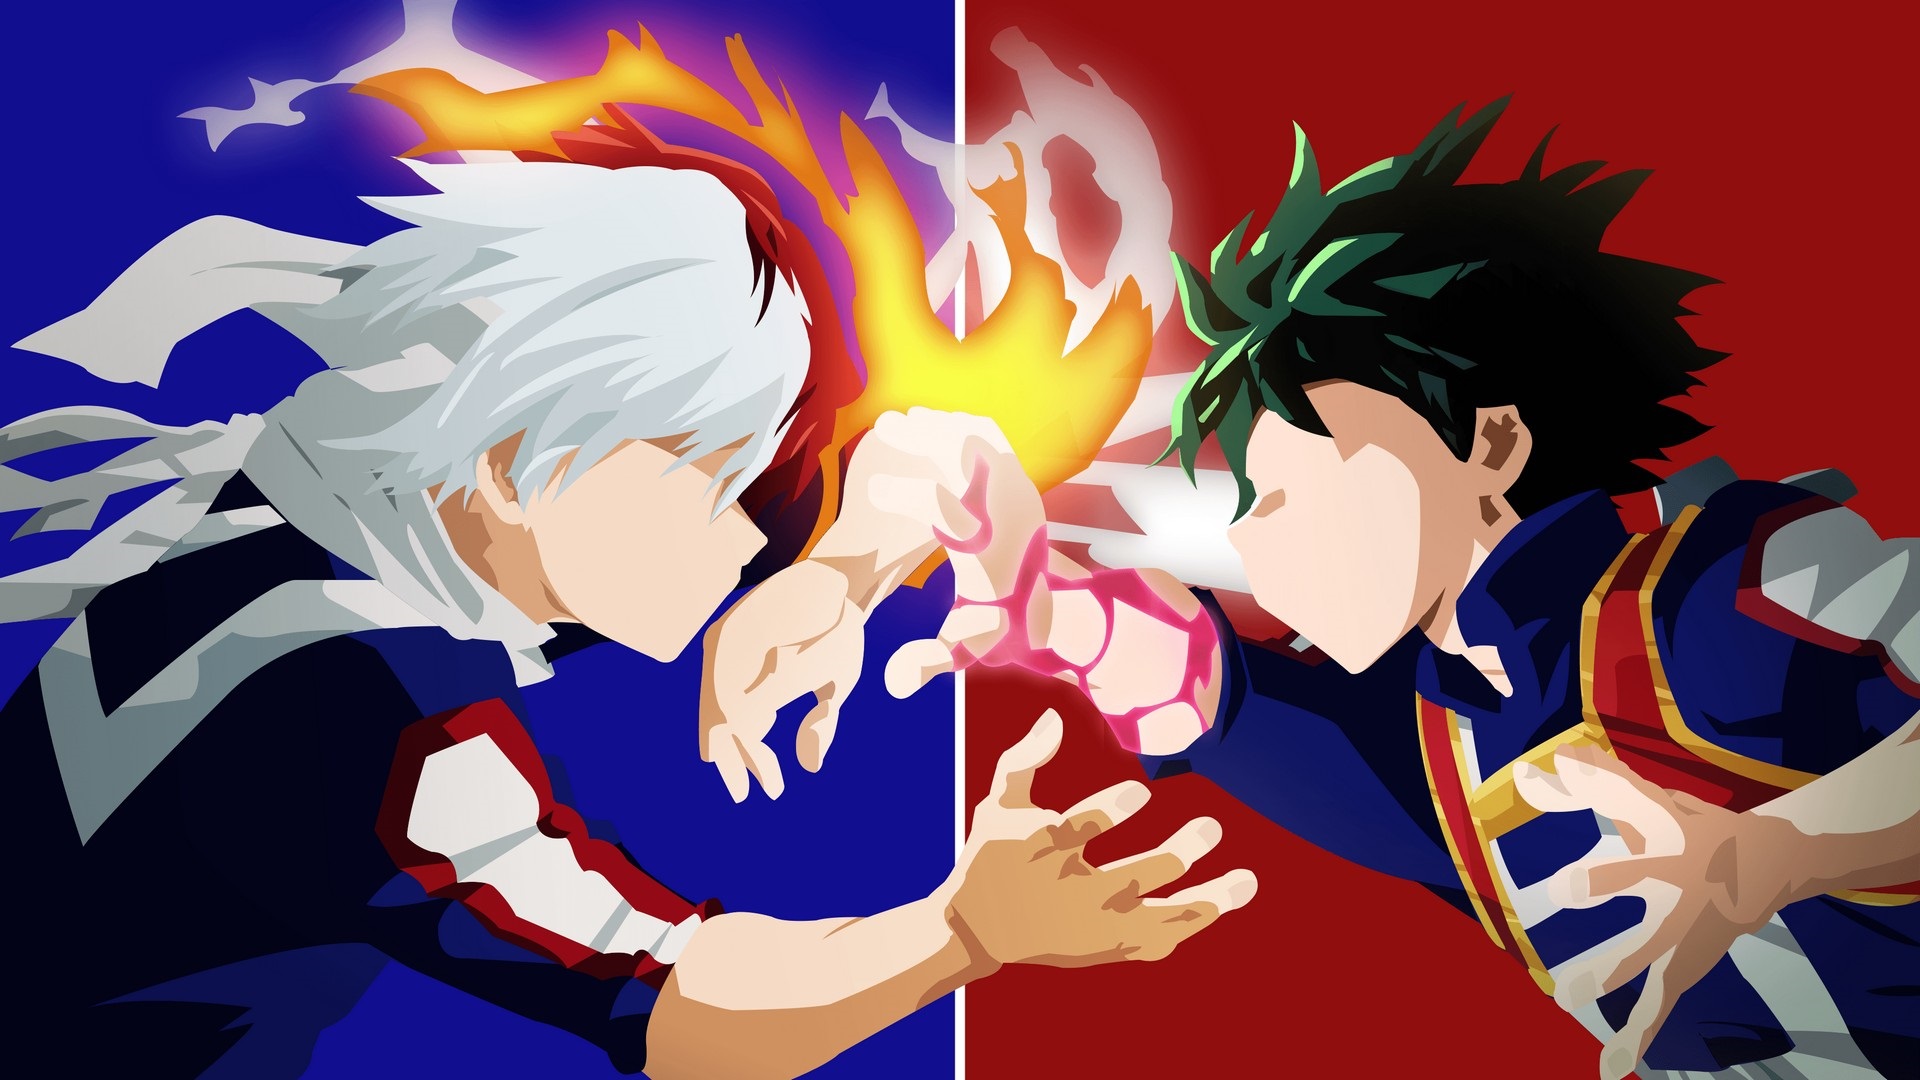 My Hero Academia Background Wallpaper HD With high-resolution 1920X1080 pixel. You can use this wallpaper for your Desktop Computer Backgrounds, Mac Wallpapers, Android Lock screen or iPhone Screensavers and another smartphone device